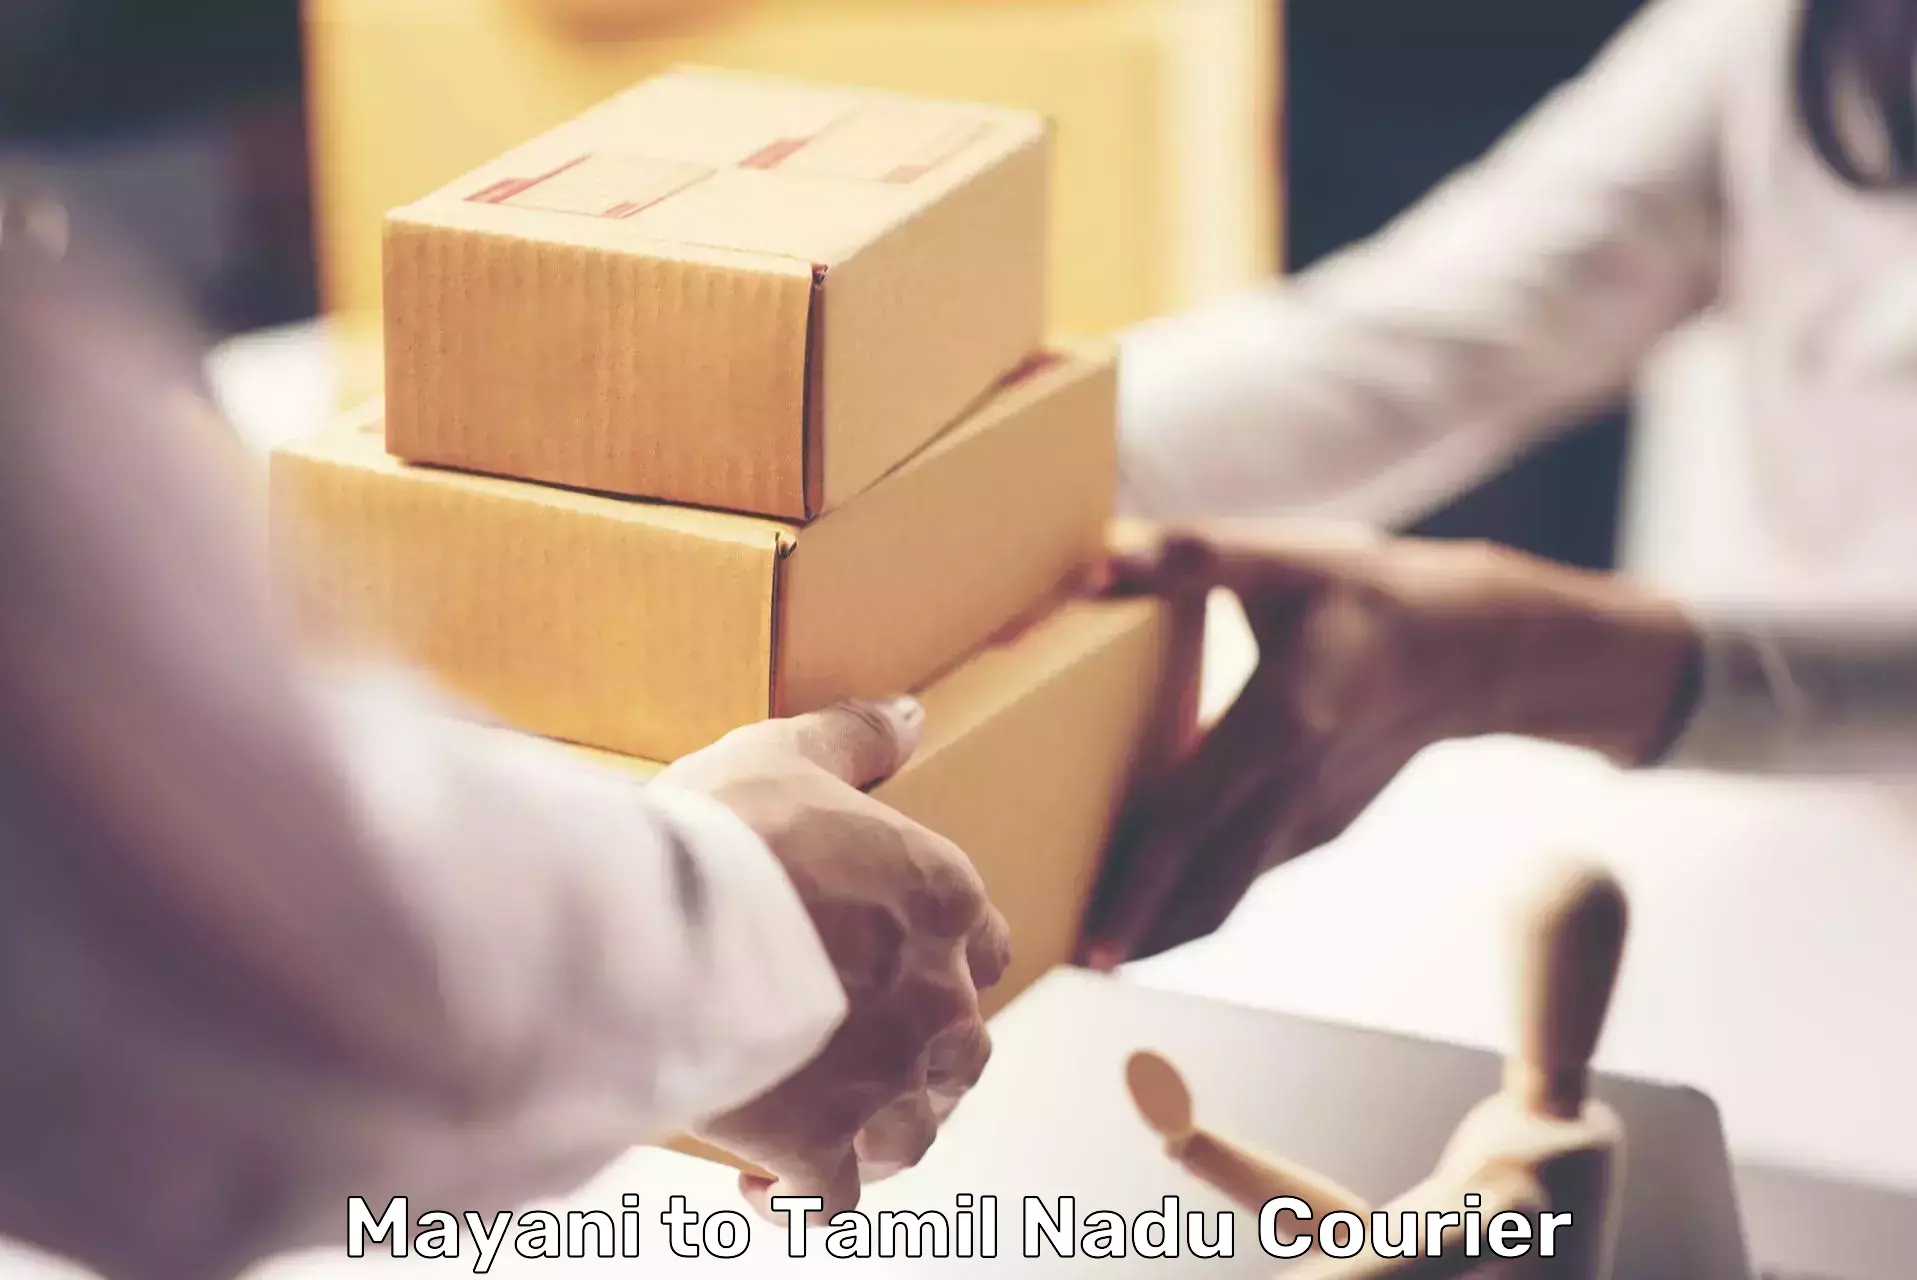 State-of-the-art courier technology Mayani to Rathinasabapathy Puram